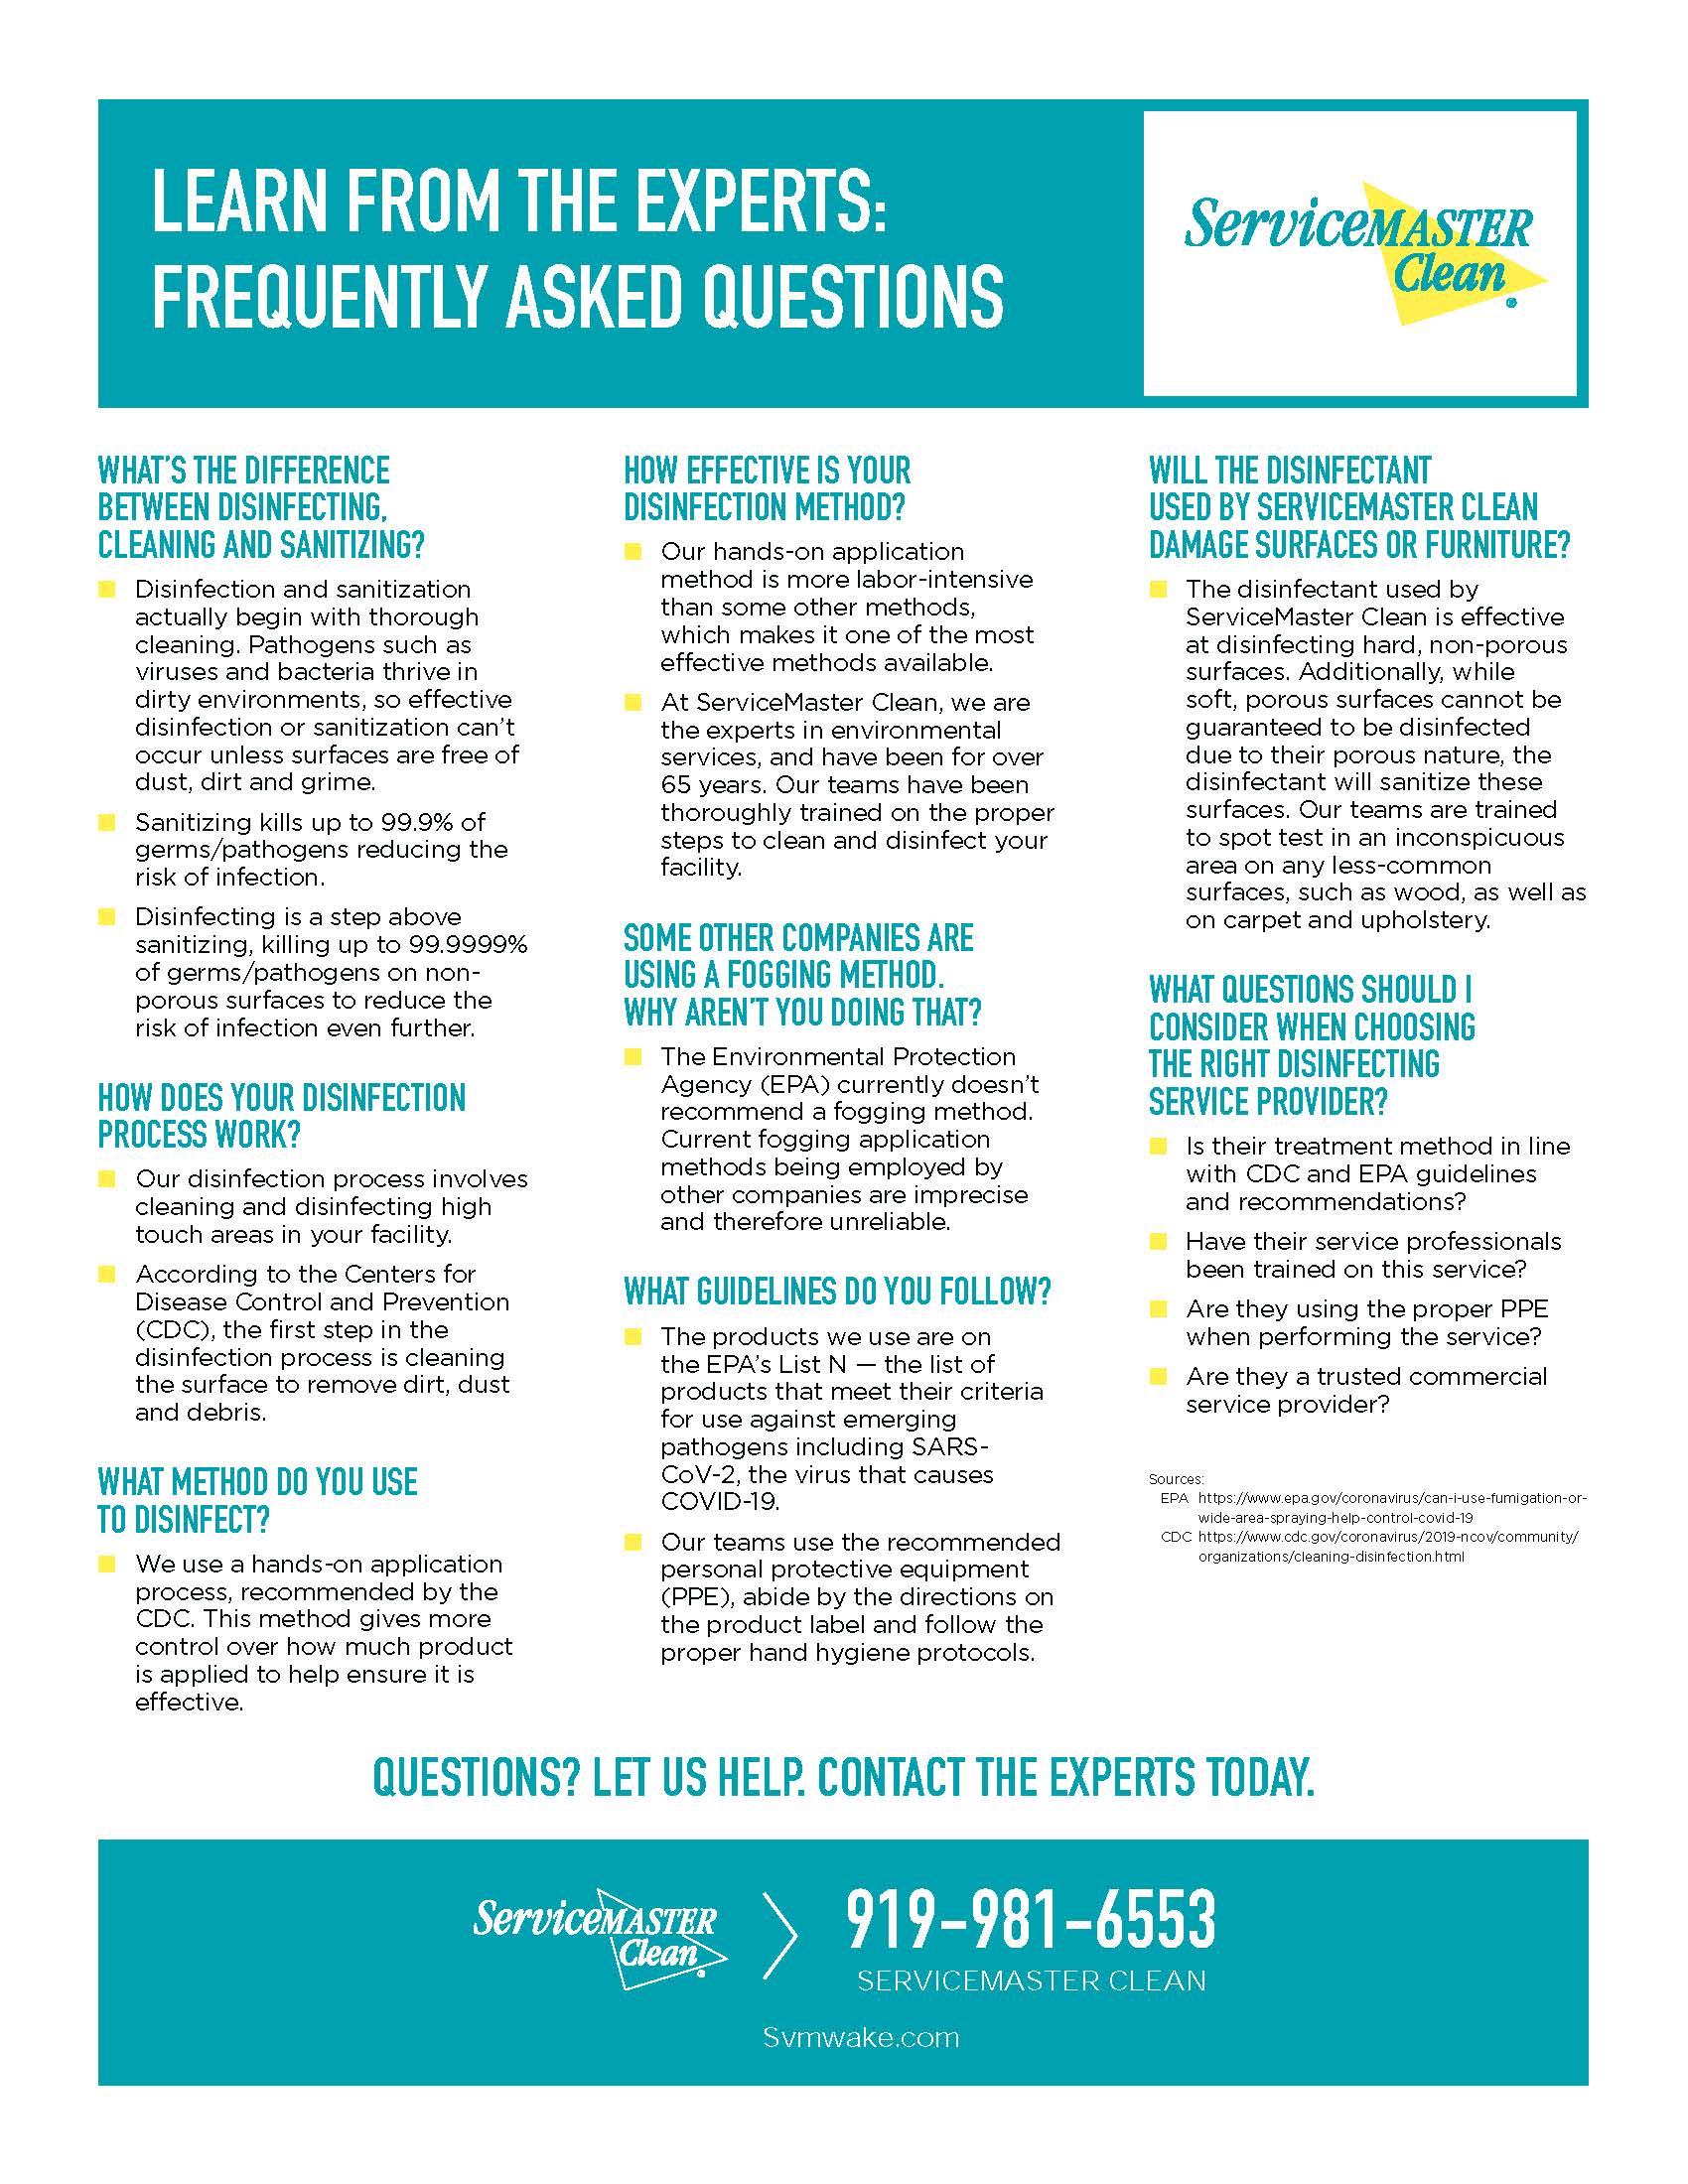 Frequently Asked Questions - Service Master Clean Cleaning Experts